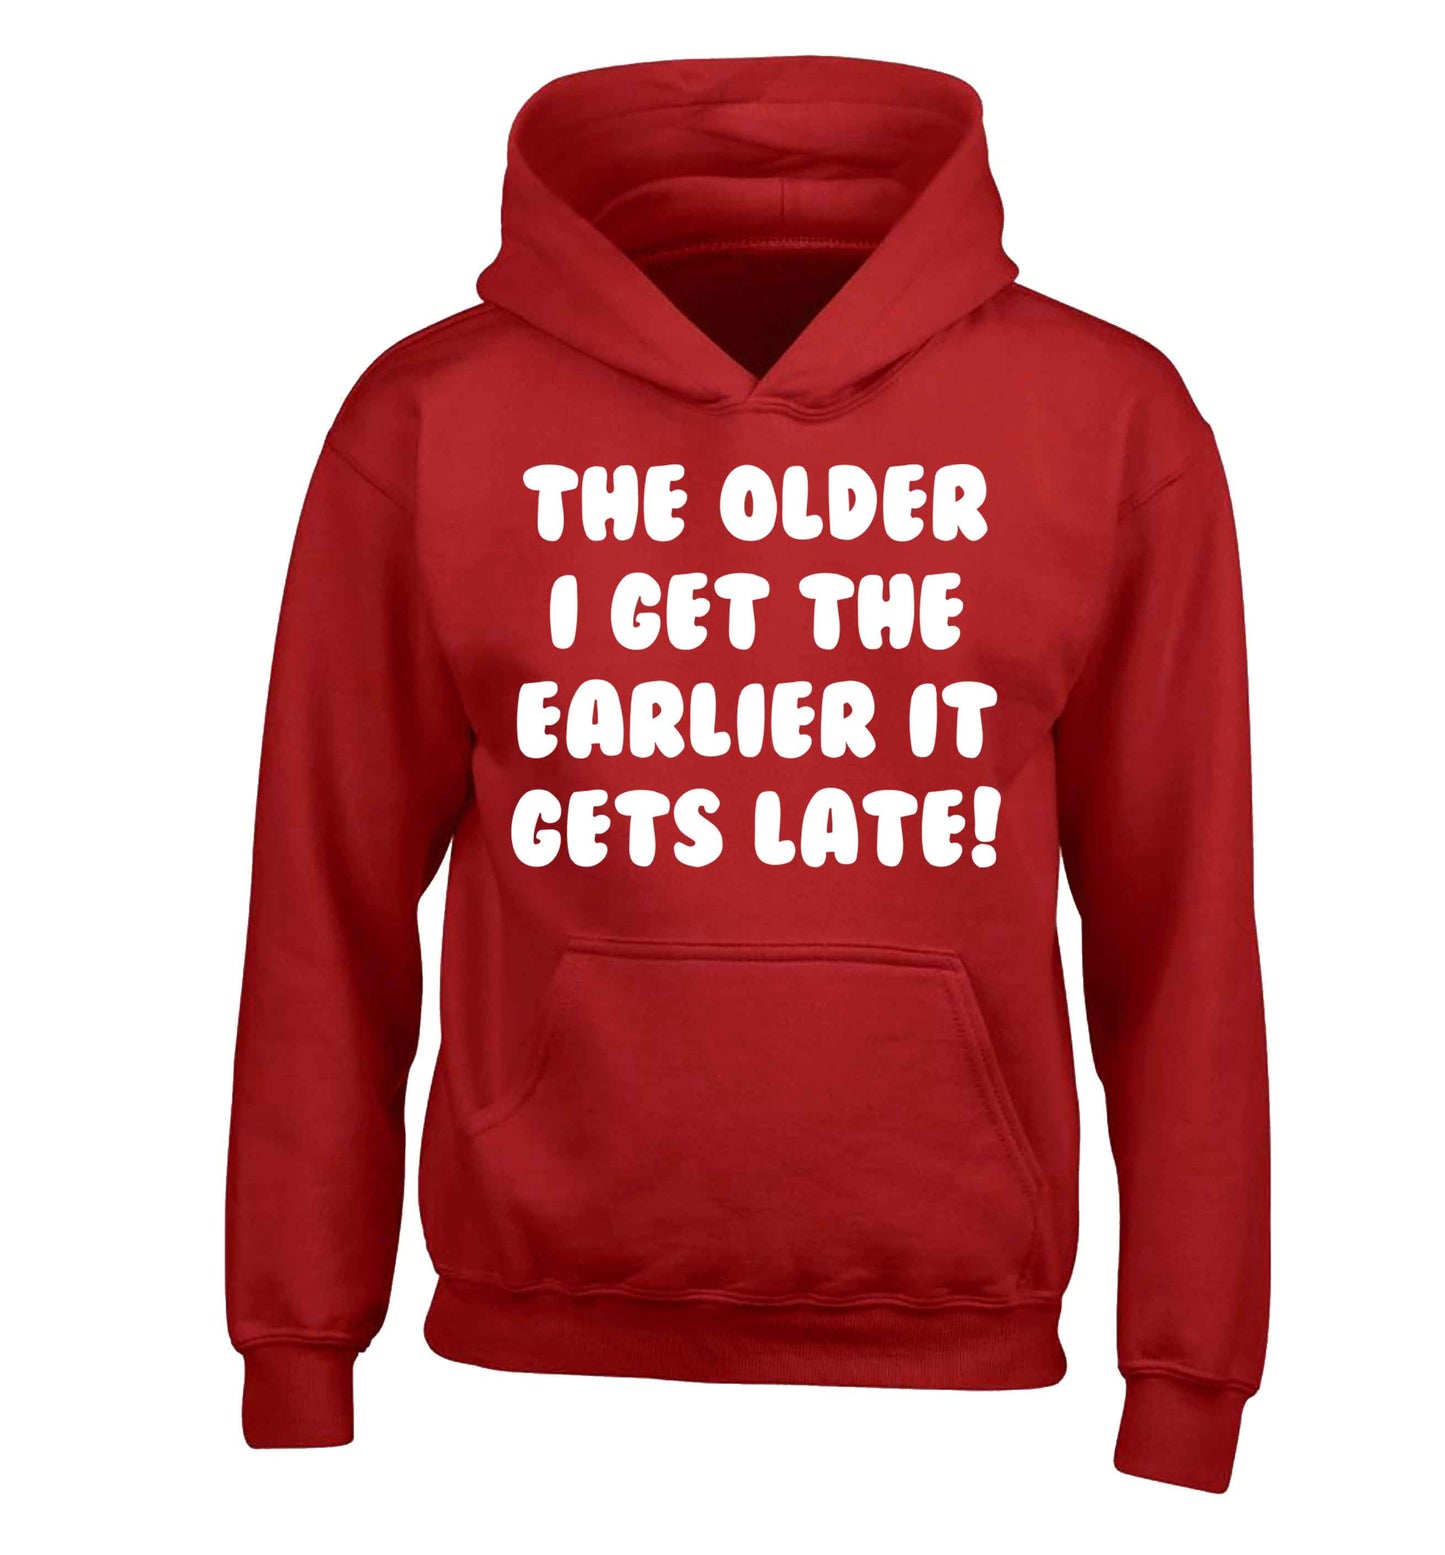 The older I get the earlier it gets late! children's red hoodie 12-13 Years